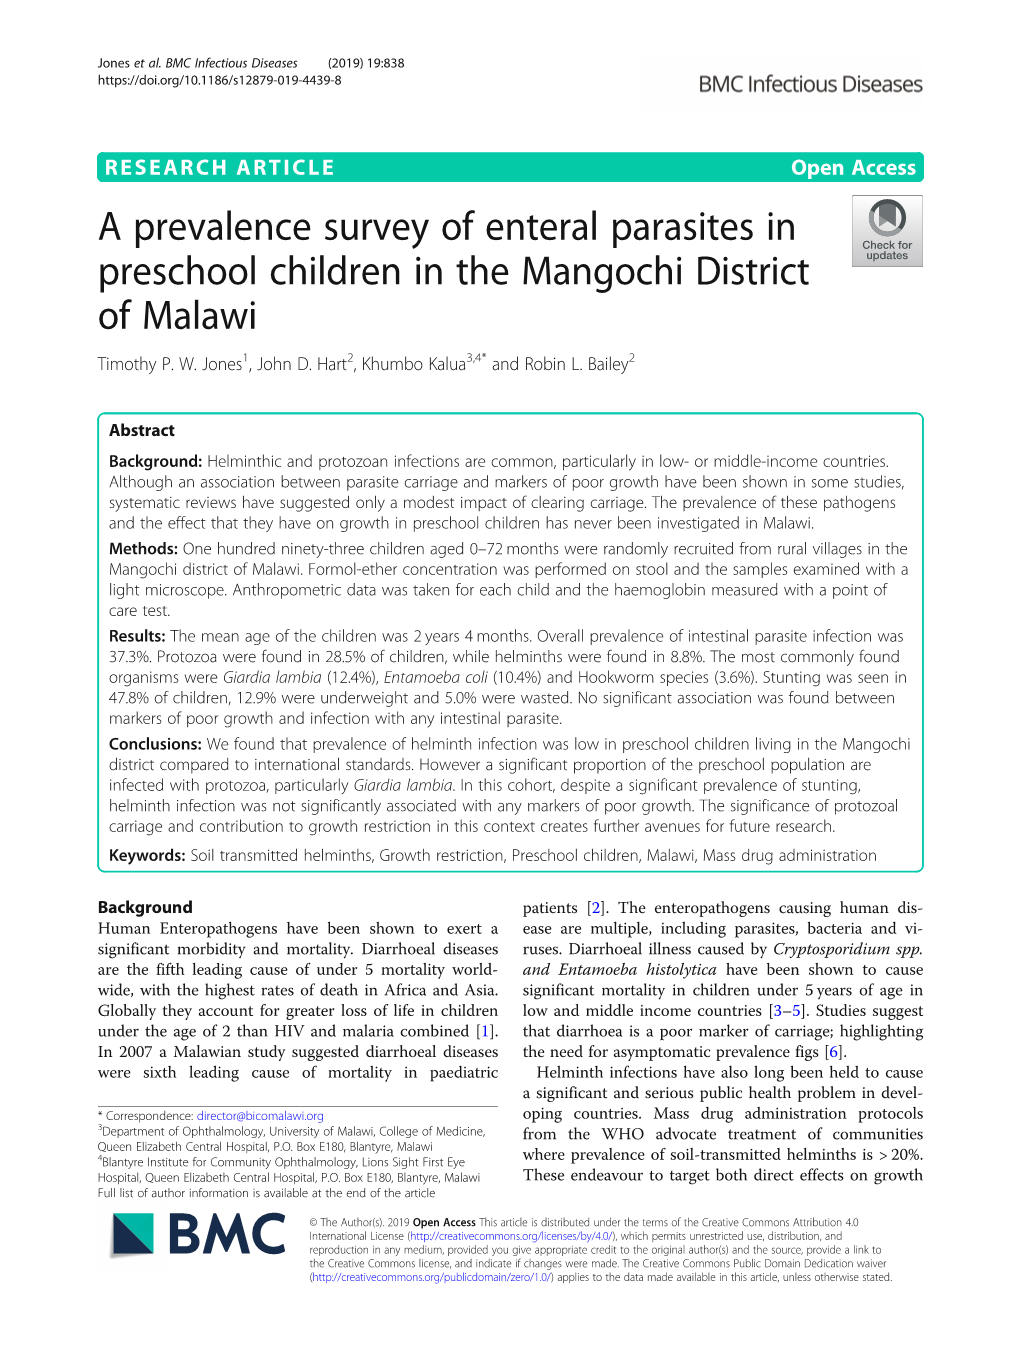 A Prevalence Survey of Enteral Parasites in Preschool Children in the Mangochi District of Malawi Timothy P